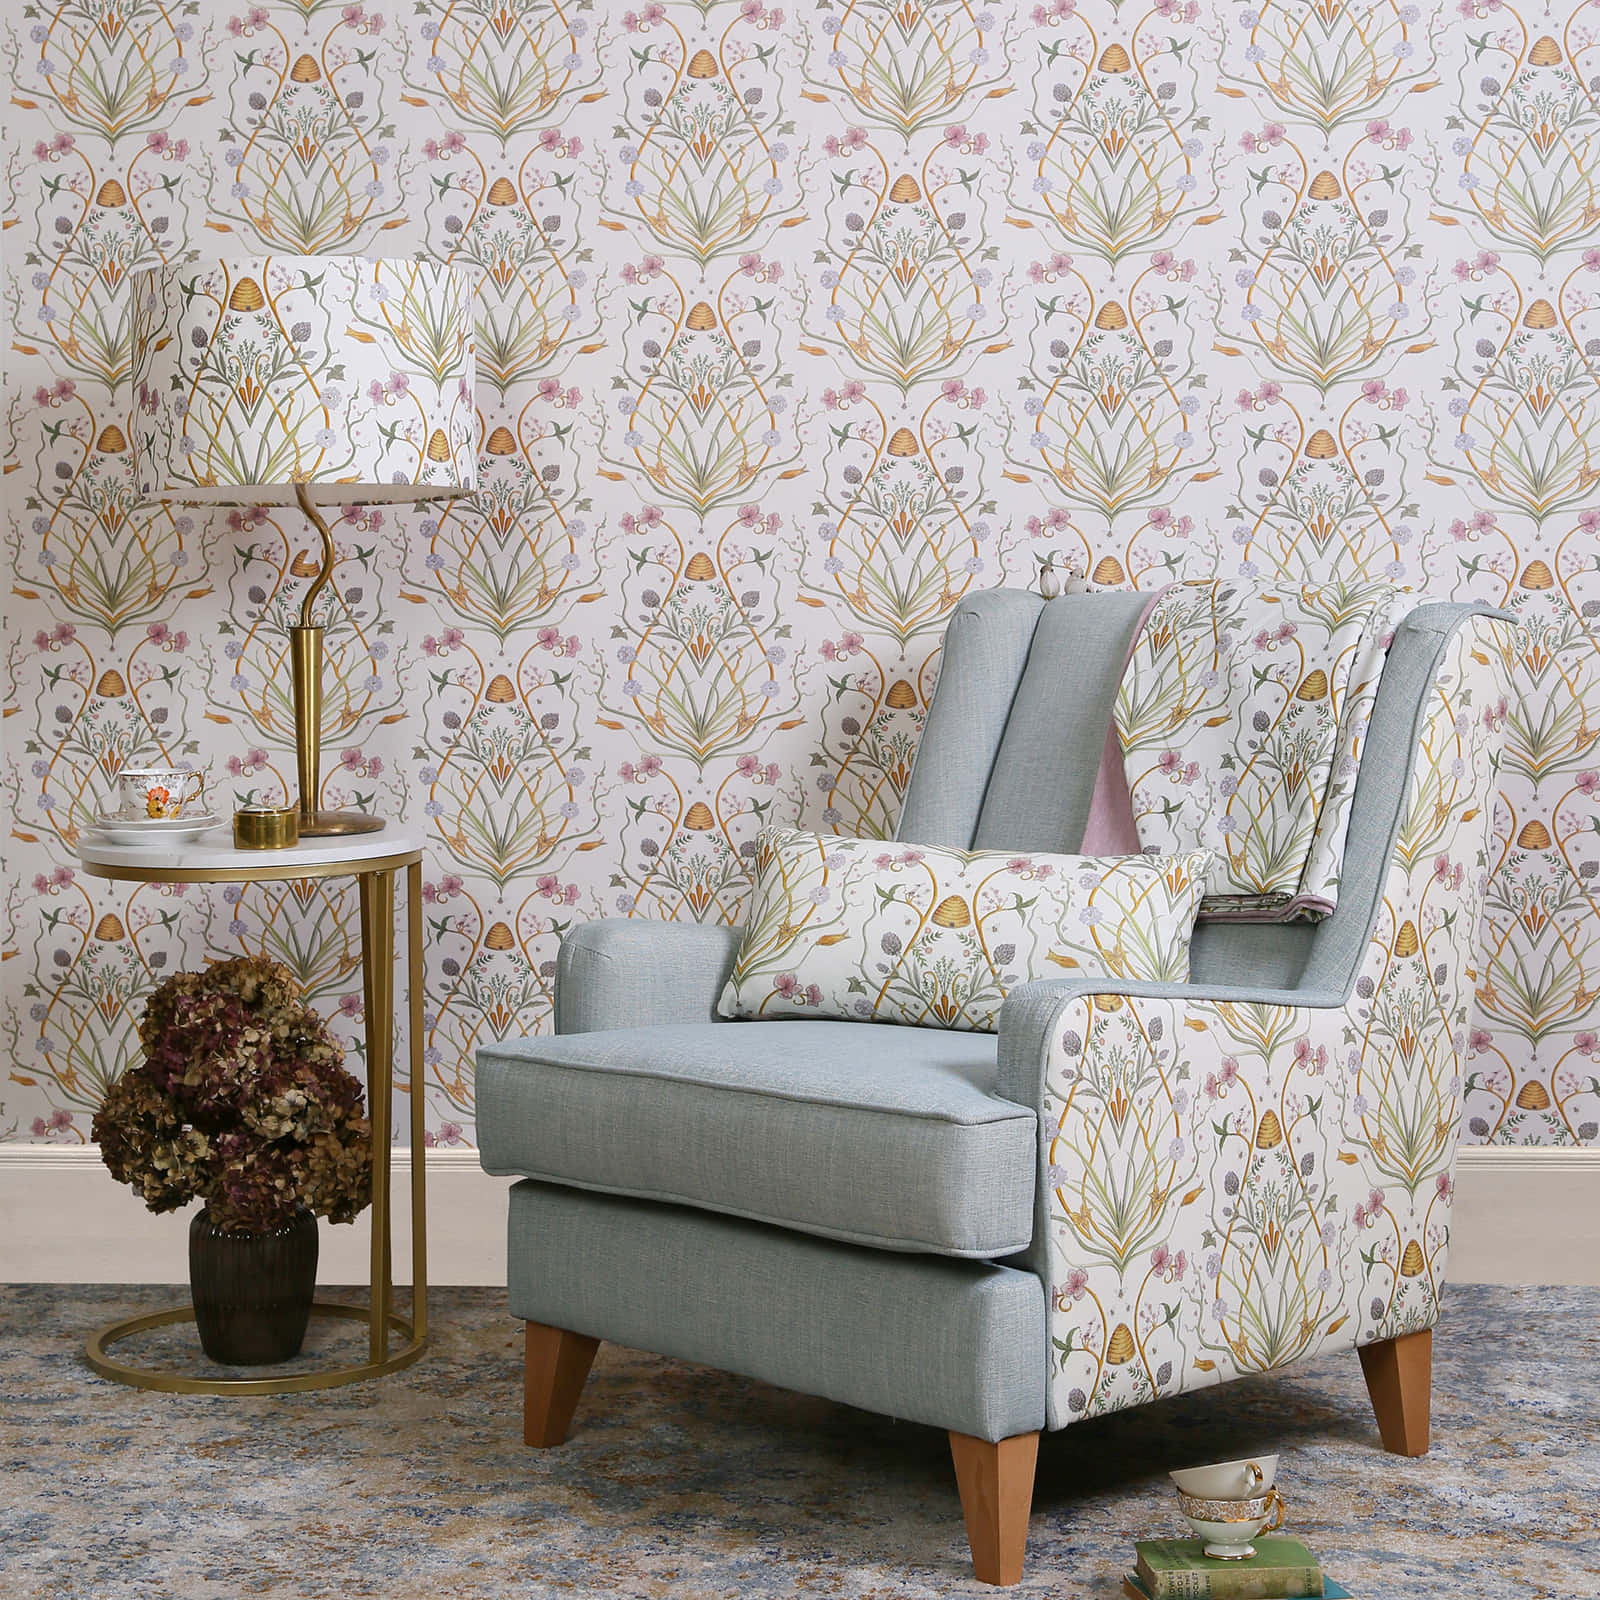 Matching Chic Pattern In The House Wallpaper